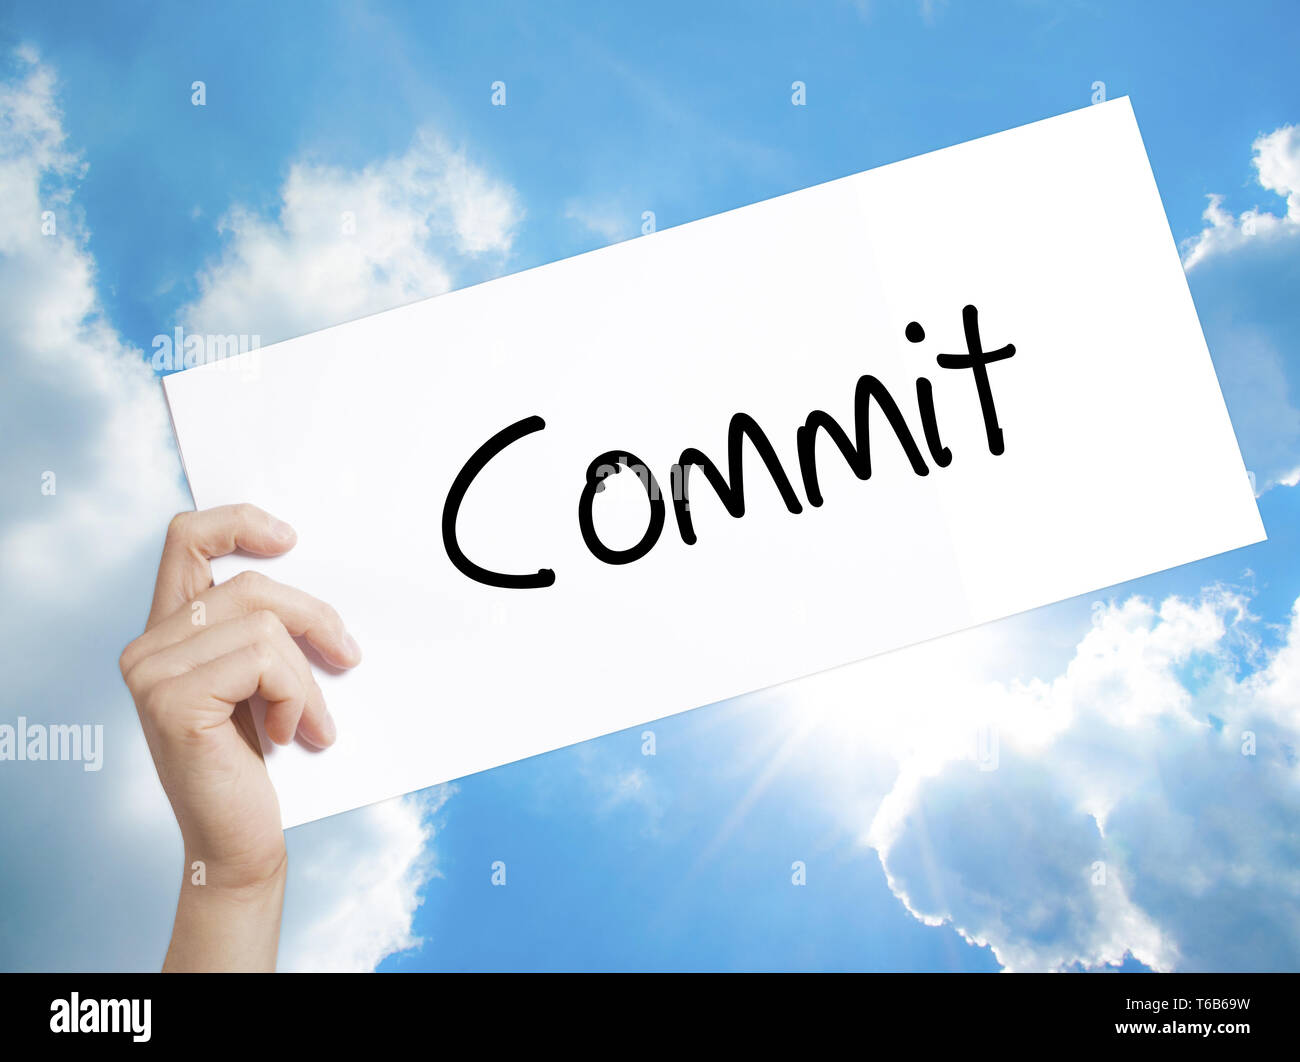 Commit Sign on white paper. Man Hand Holding Paper with text. Isolated on sky background Stock Photo